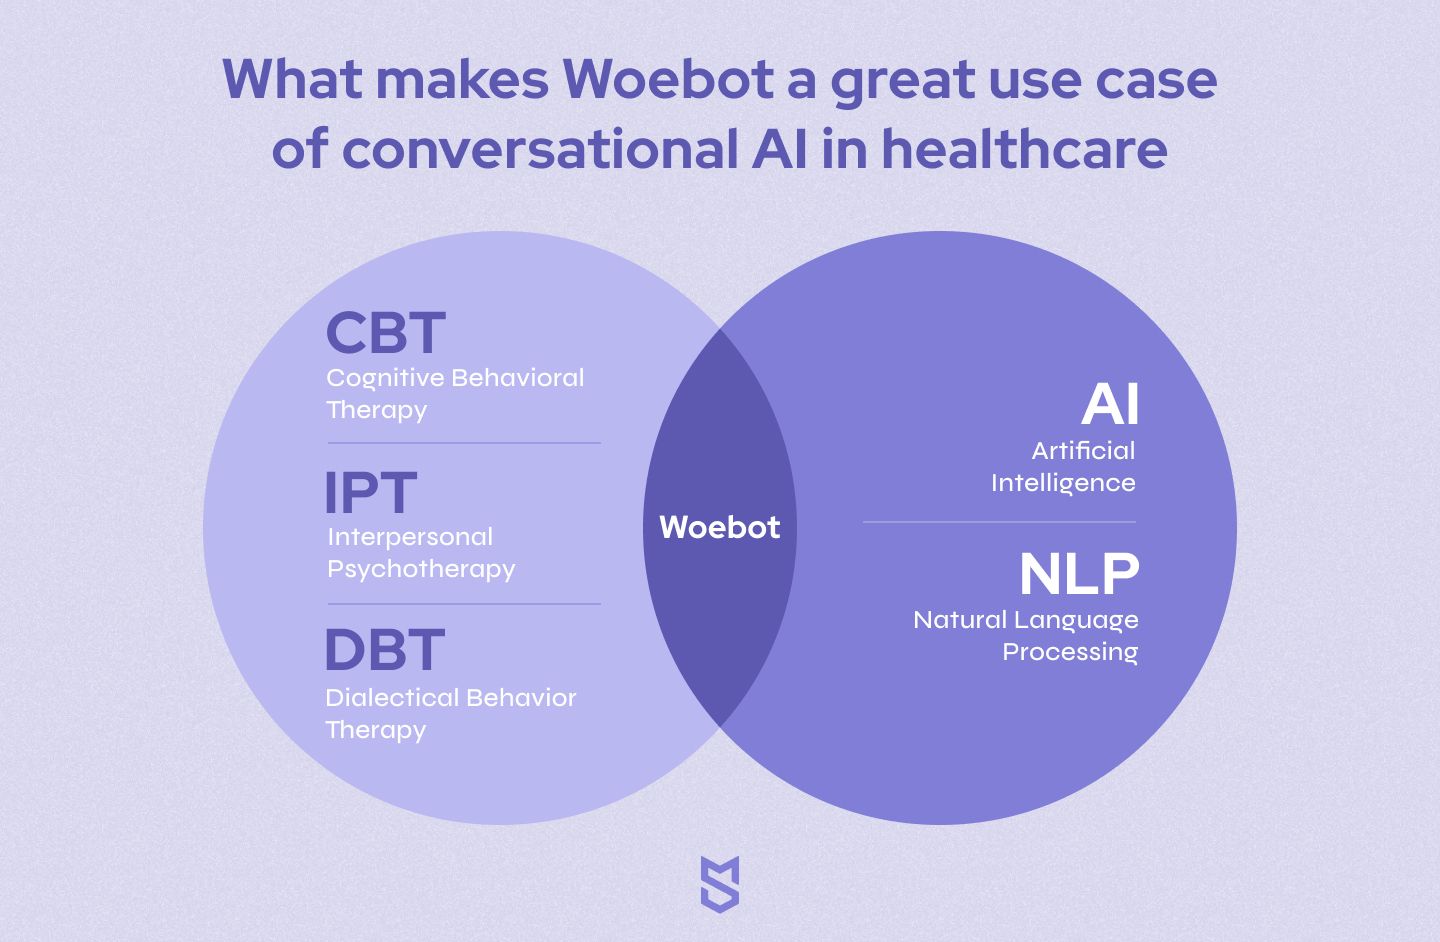 What makes Woebot a great use case of conversational AI in healthcare